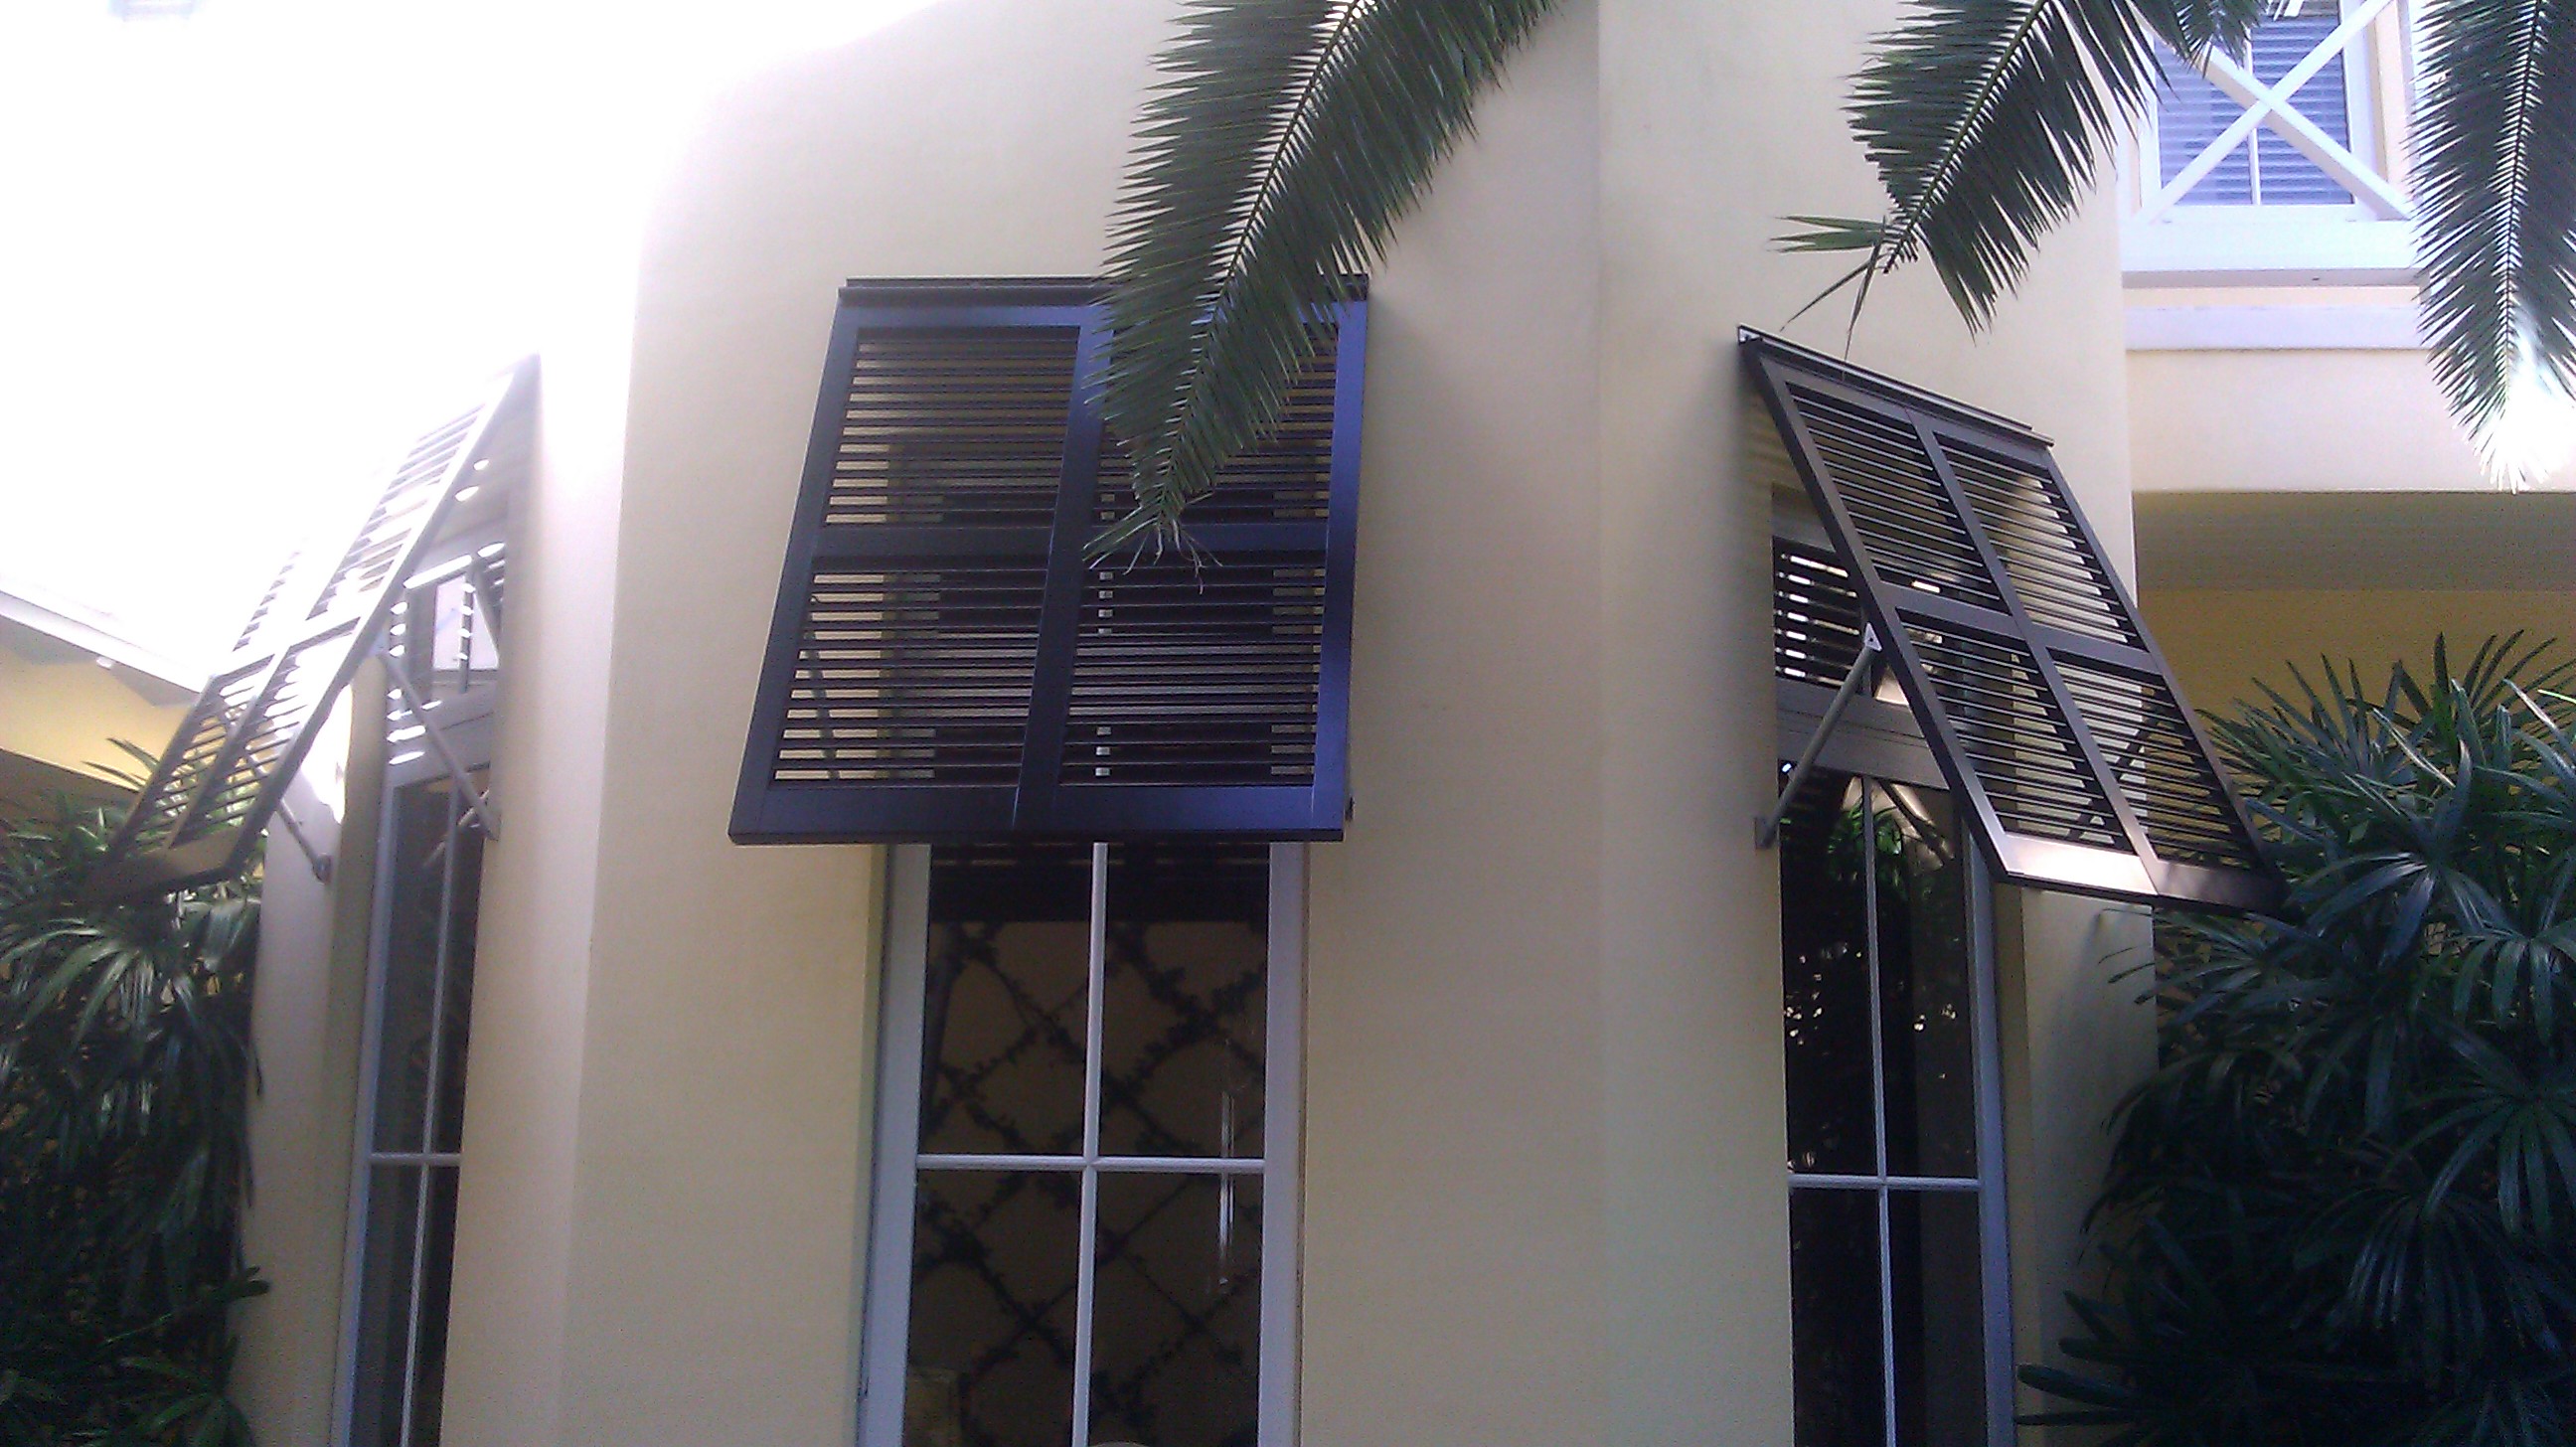 Bahama shutters are aestetically appealing